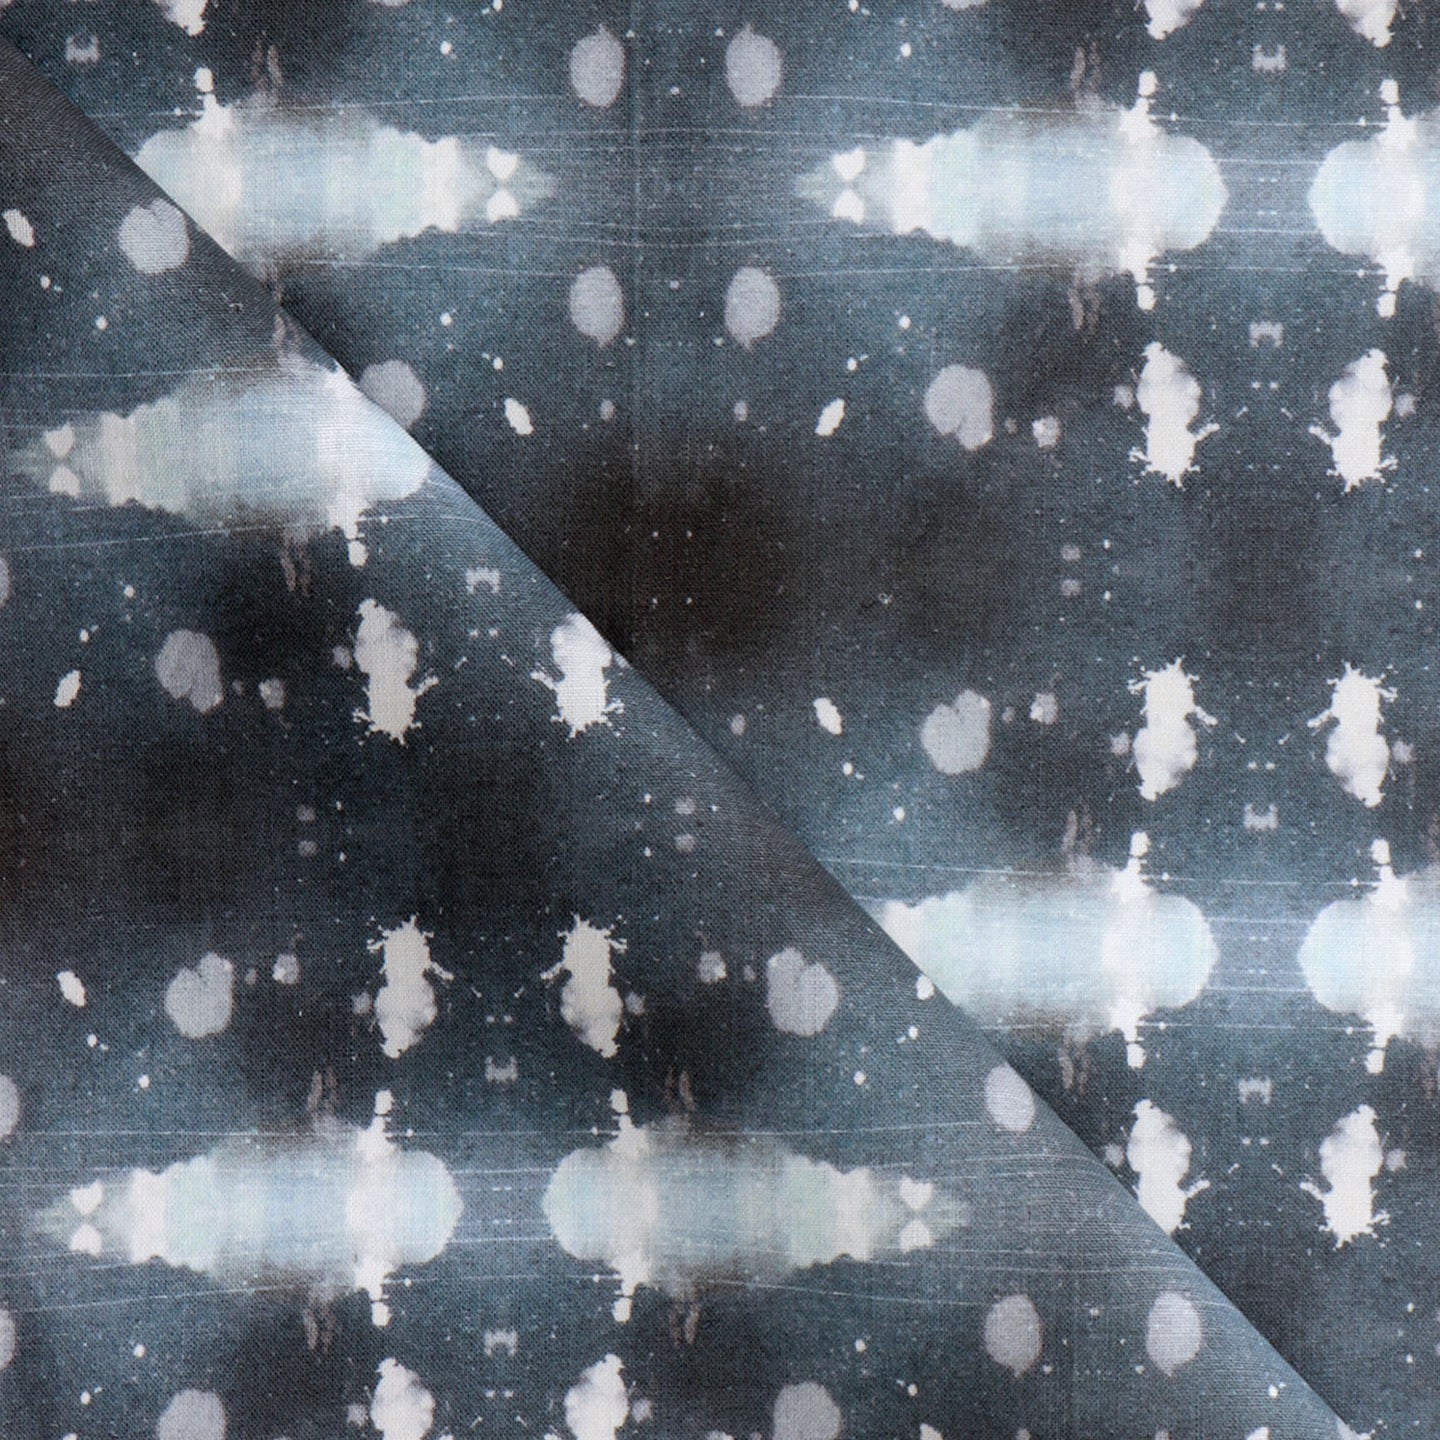 A blue and white fabric with spots on it